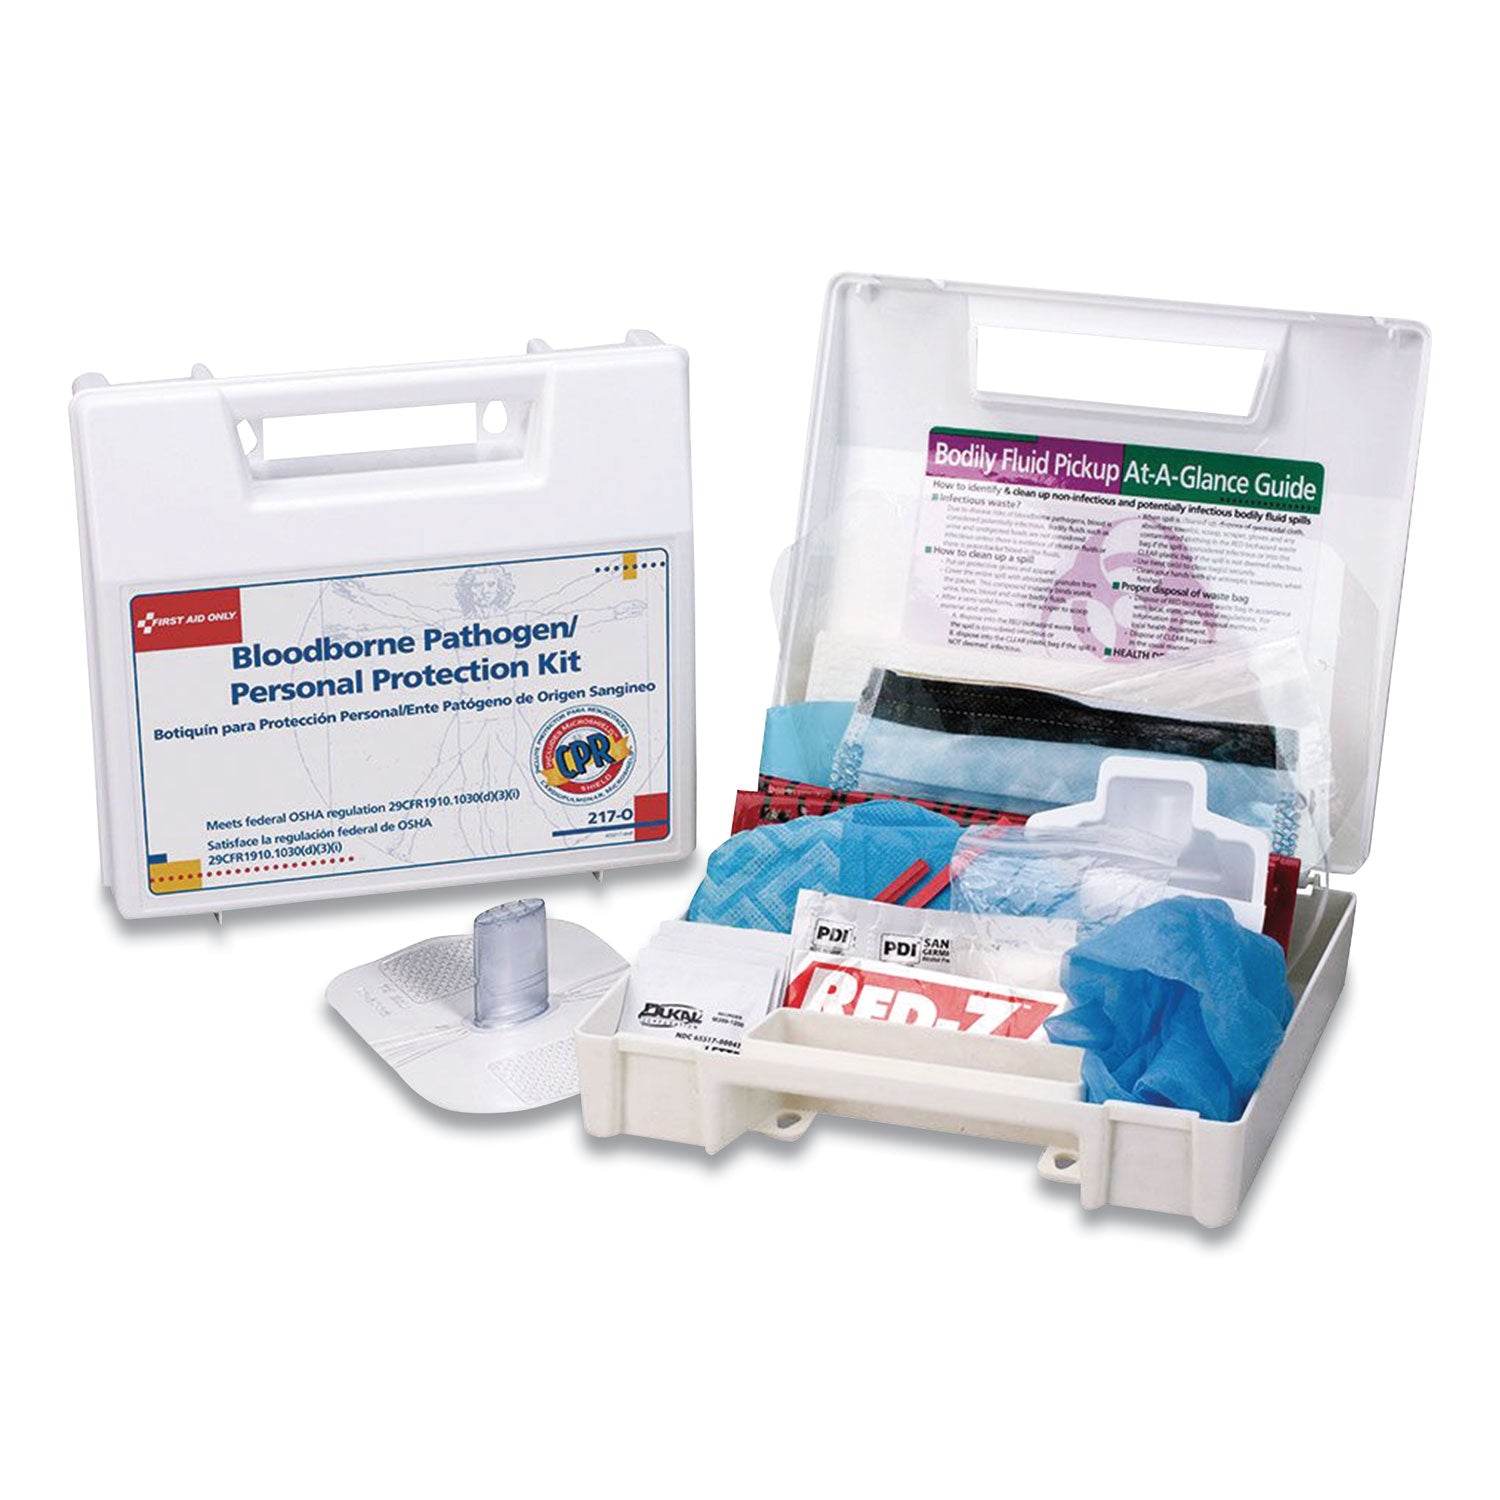 bloodborne-pathogen-and-personal-protection-kit-with-microshield-26-pieces-plastic-case_fao217o - 1